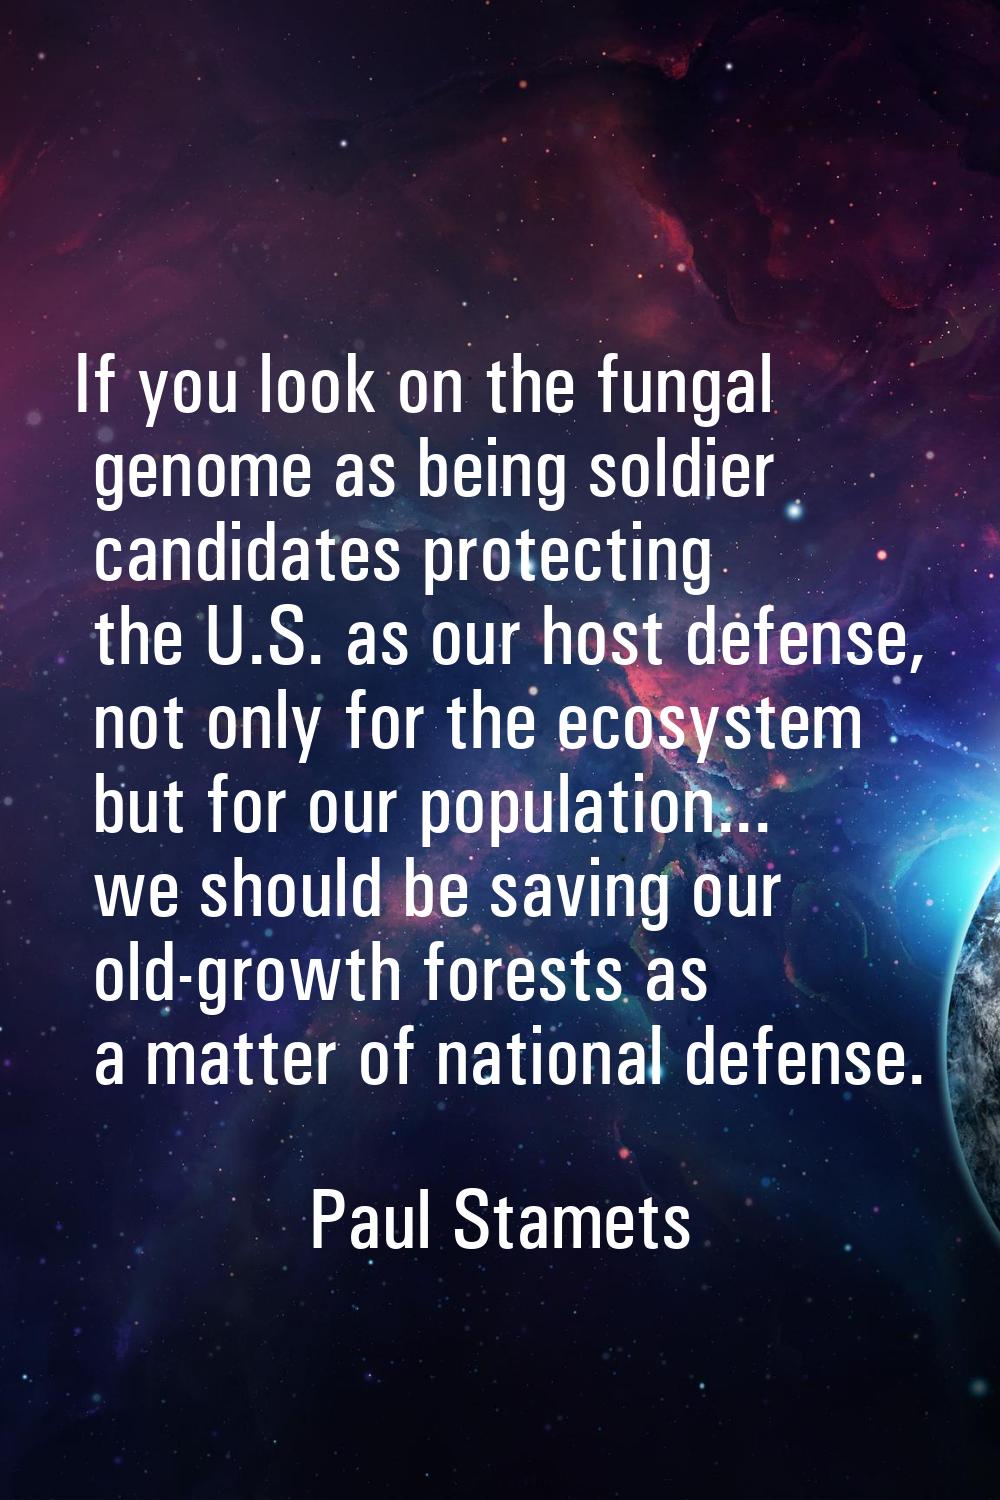 If you look on the fungal genome as being soldier candidates protecting the U.S. as our host defens